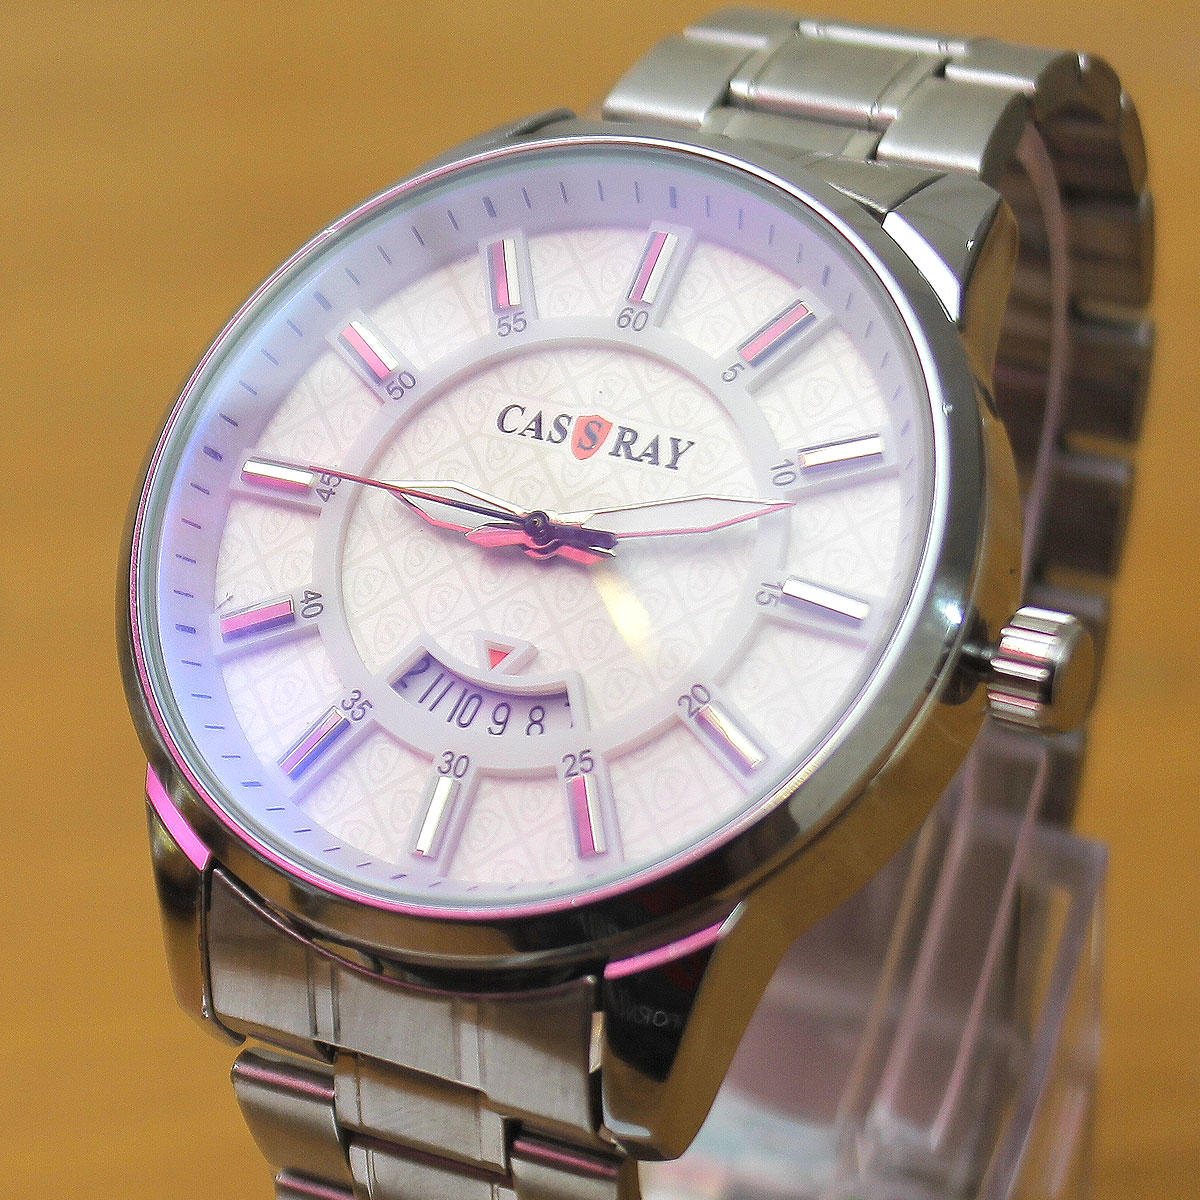 Stylish Cassray Watches For Men | Cassray Watch In Pakistan | Cassray Watch  in Karachi - YouTube